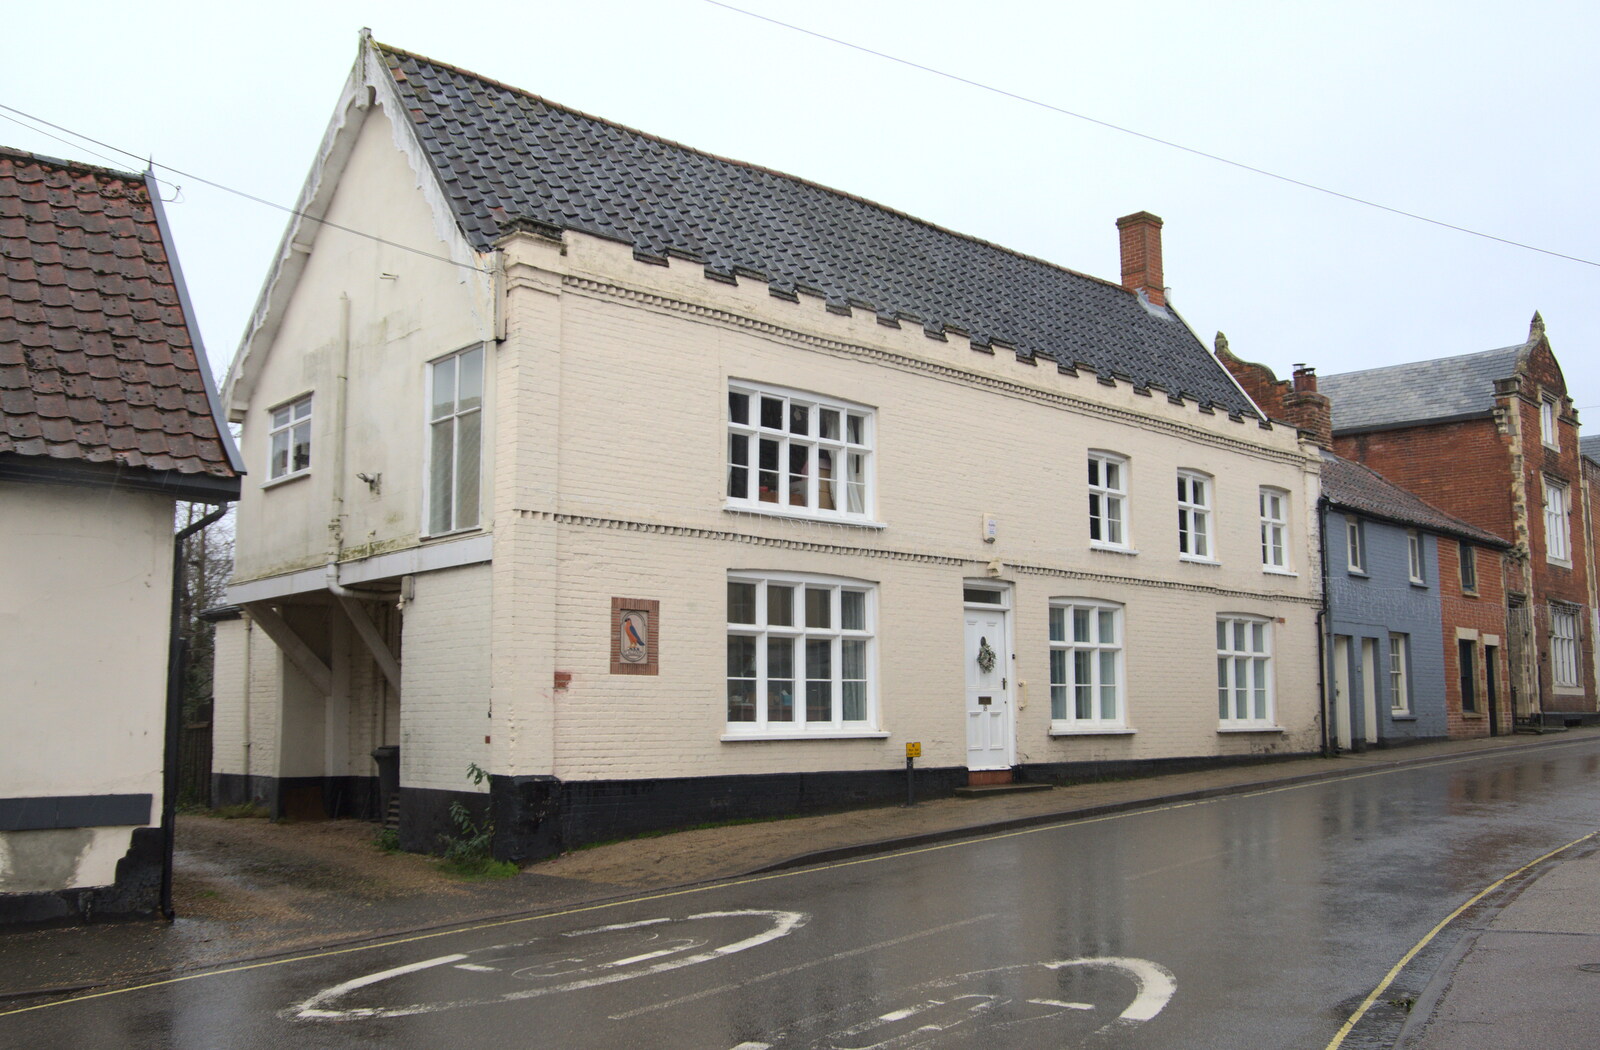 The former pub on Lowgate Street from New Year's Day, Brome, Suffolk - 1st January 2022